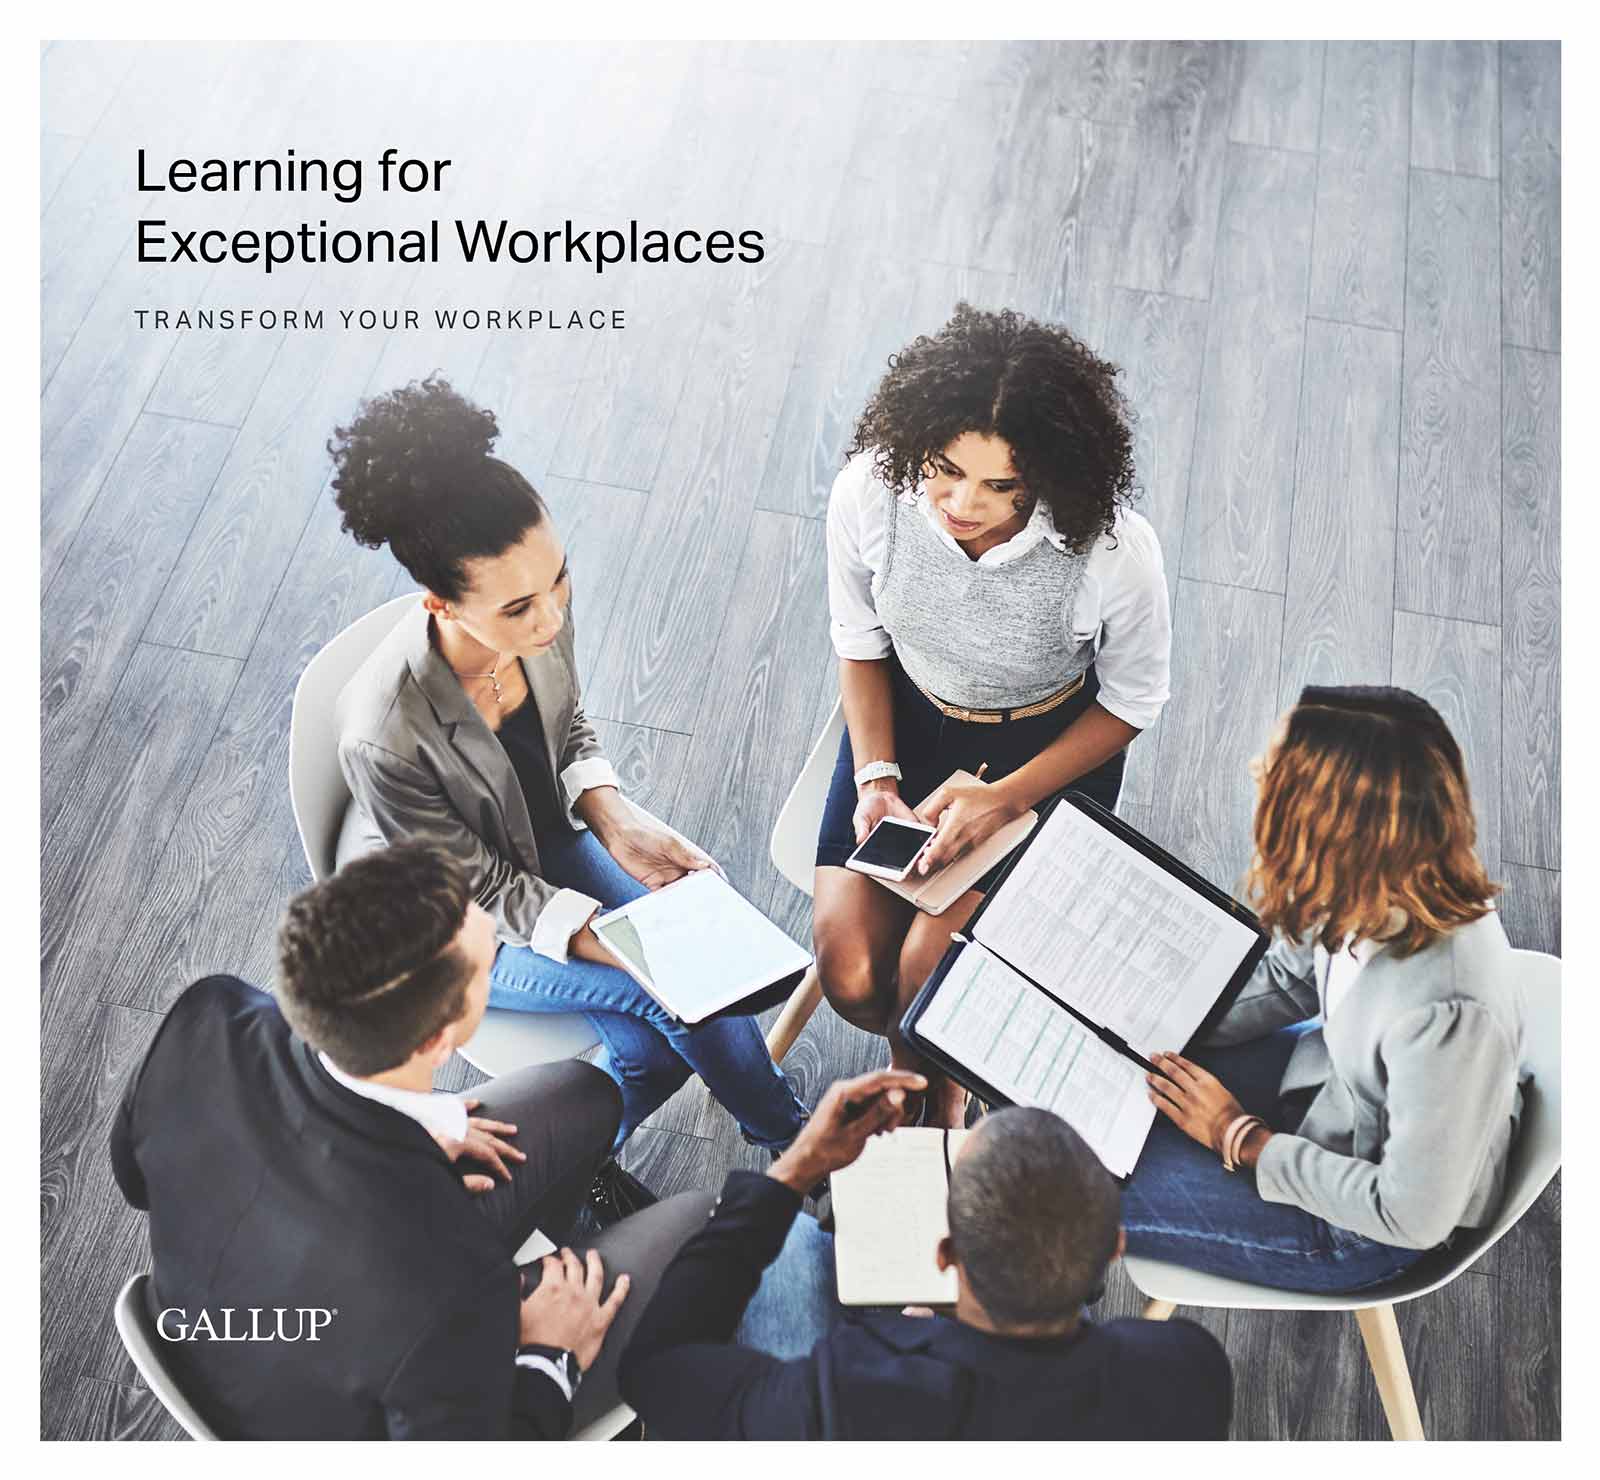 Learning for Exceptional Workplaces Guide